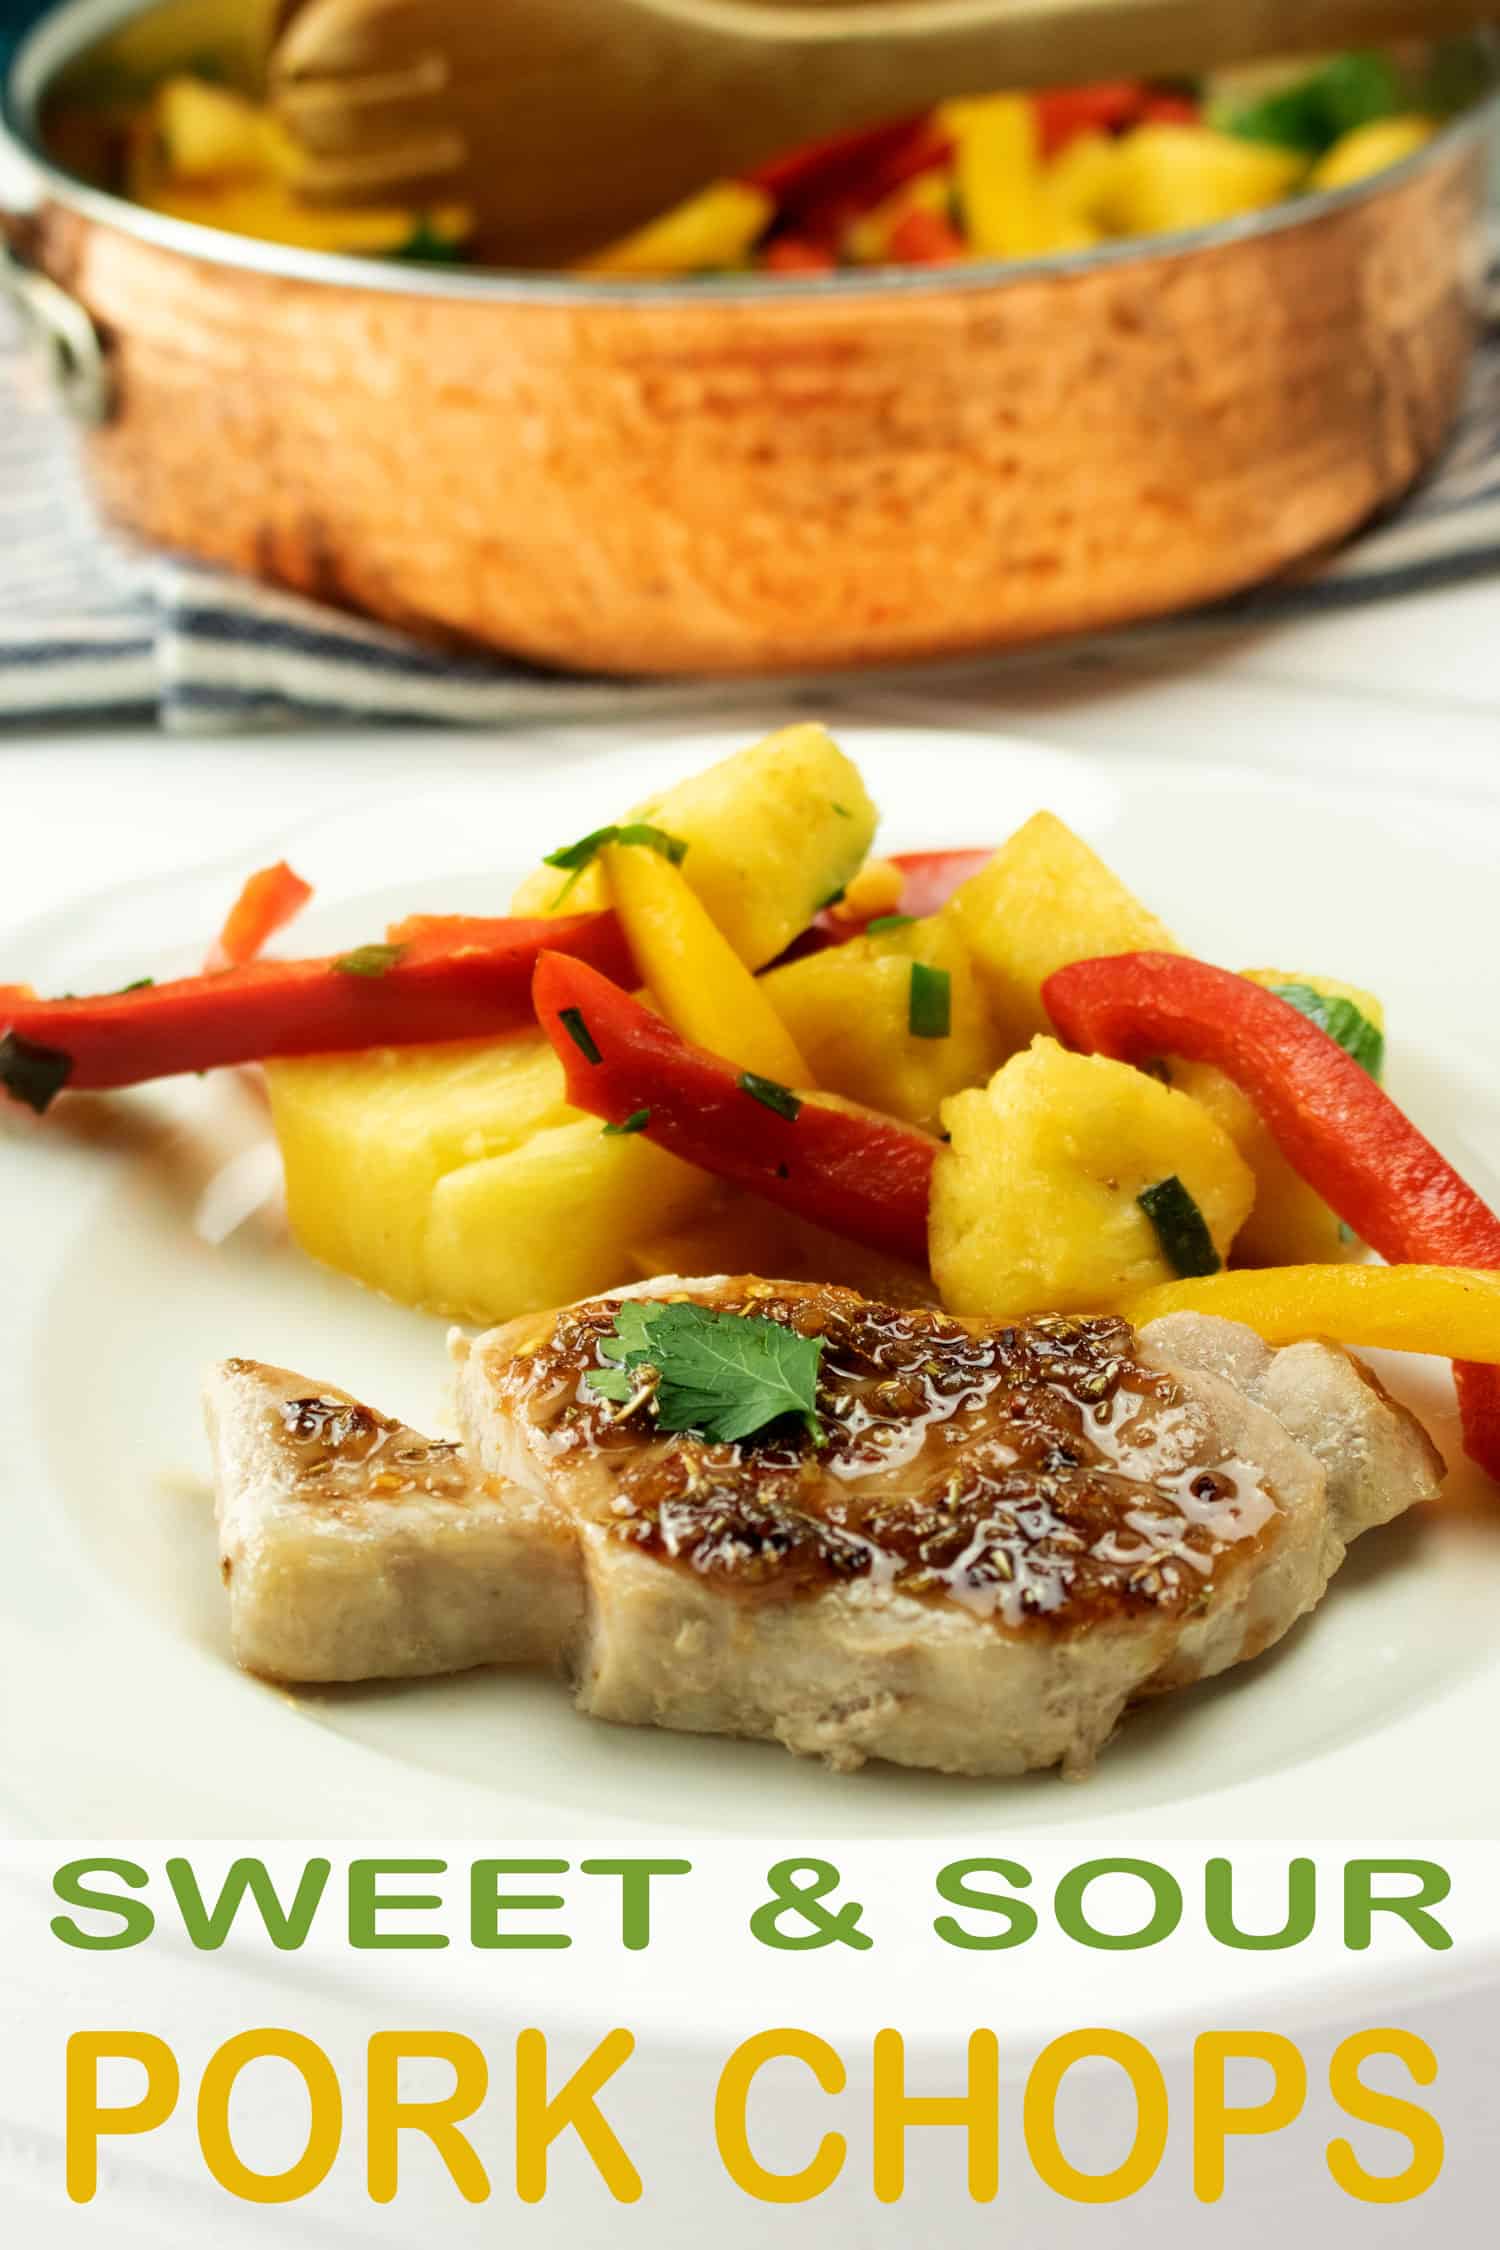 healthy pork chops recipe with vegetables on white plate